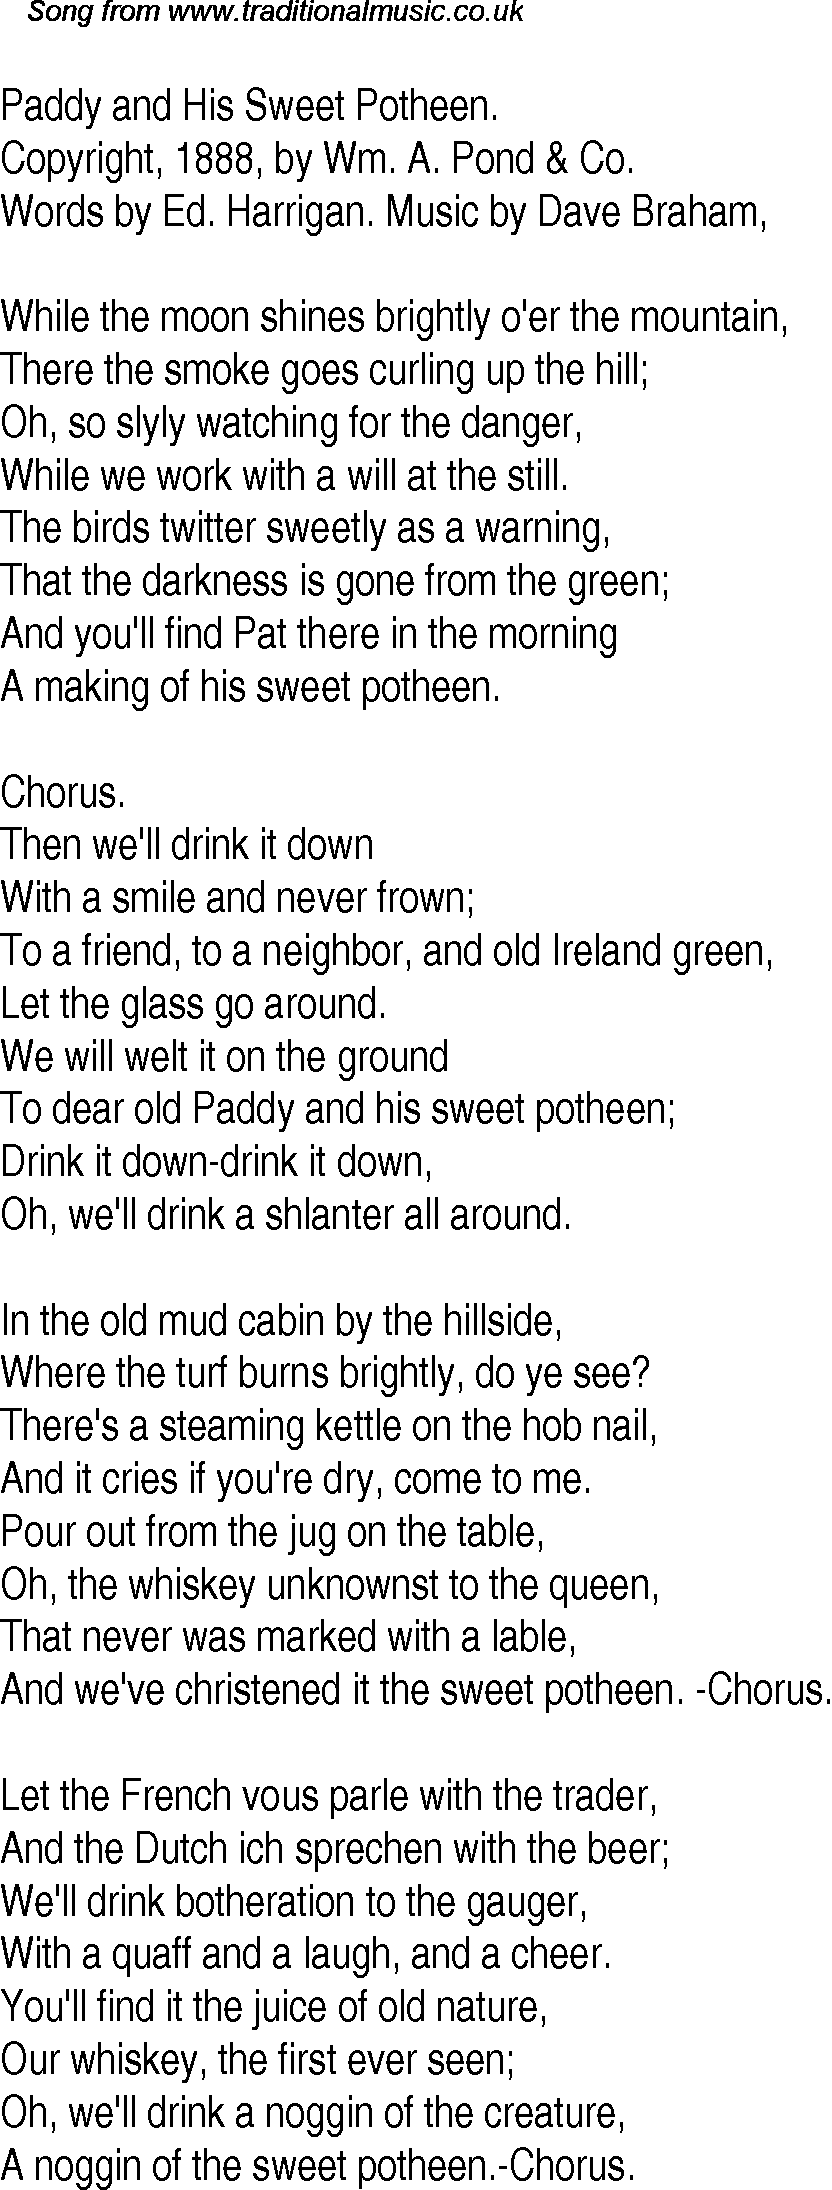 Old Time Song Lyrics For 25 Paddy And His Sweet Potheen